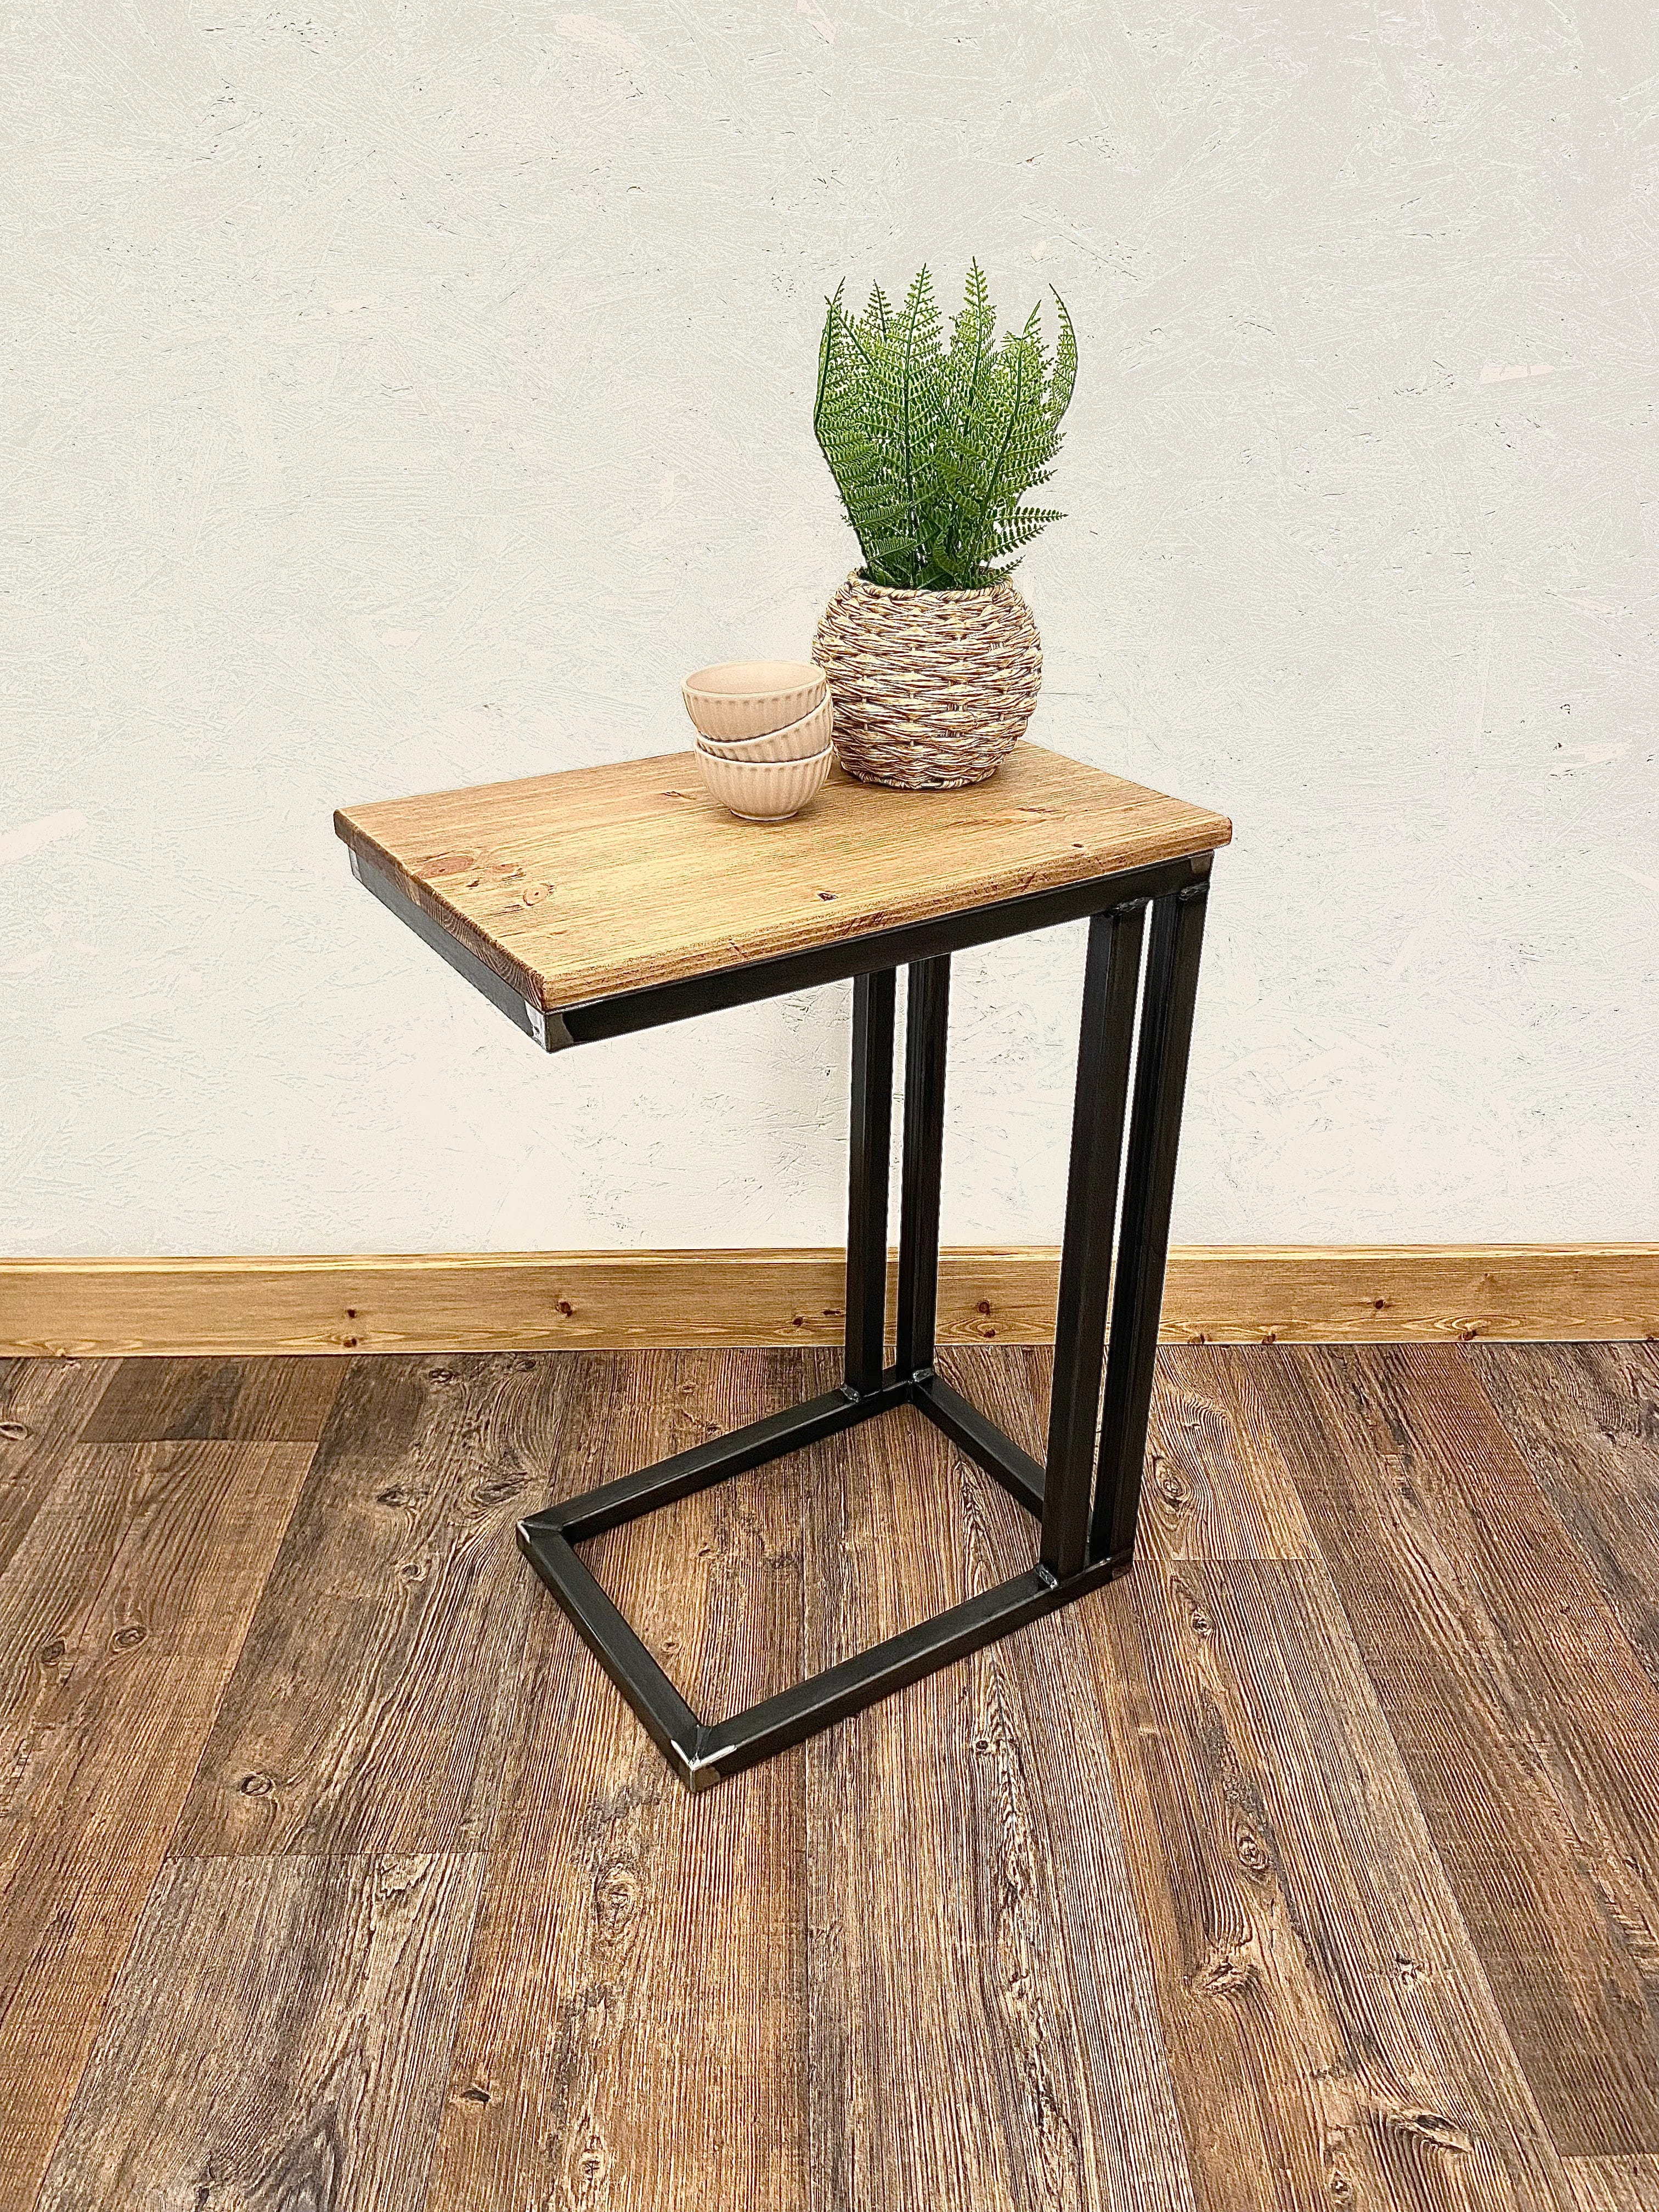 Rustic C Shaped Side table - Sofa table - Laptop table C shaped laptop table FREE DELIVERY   